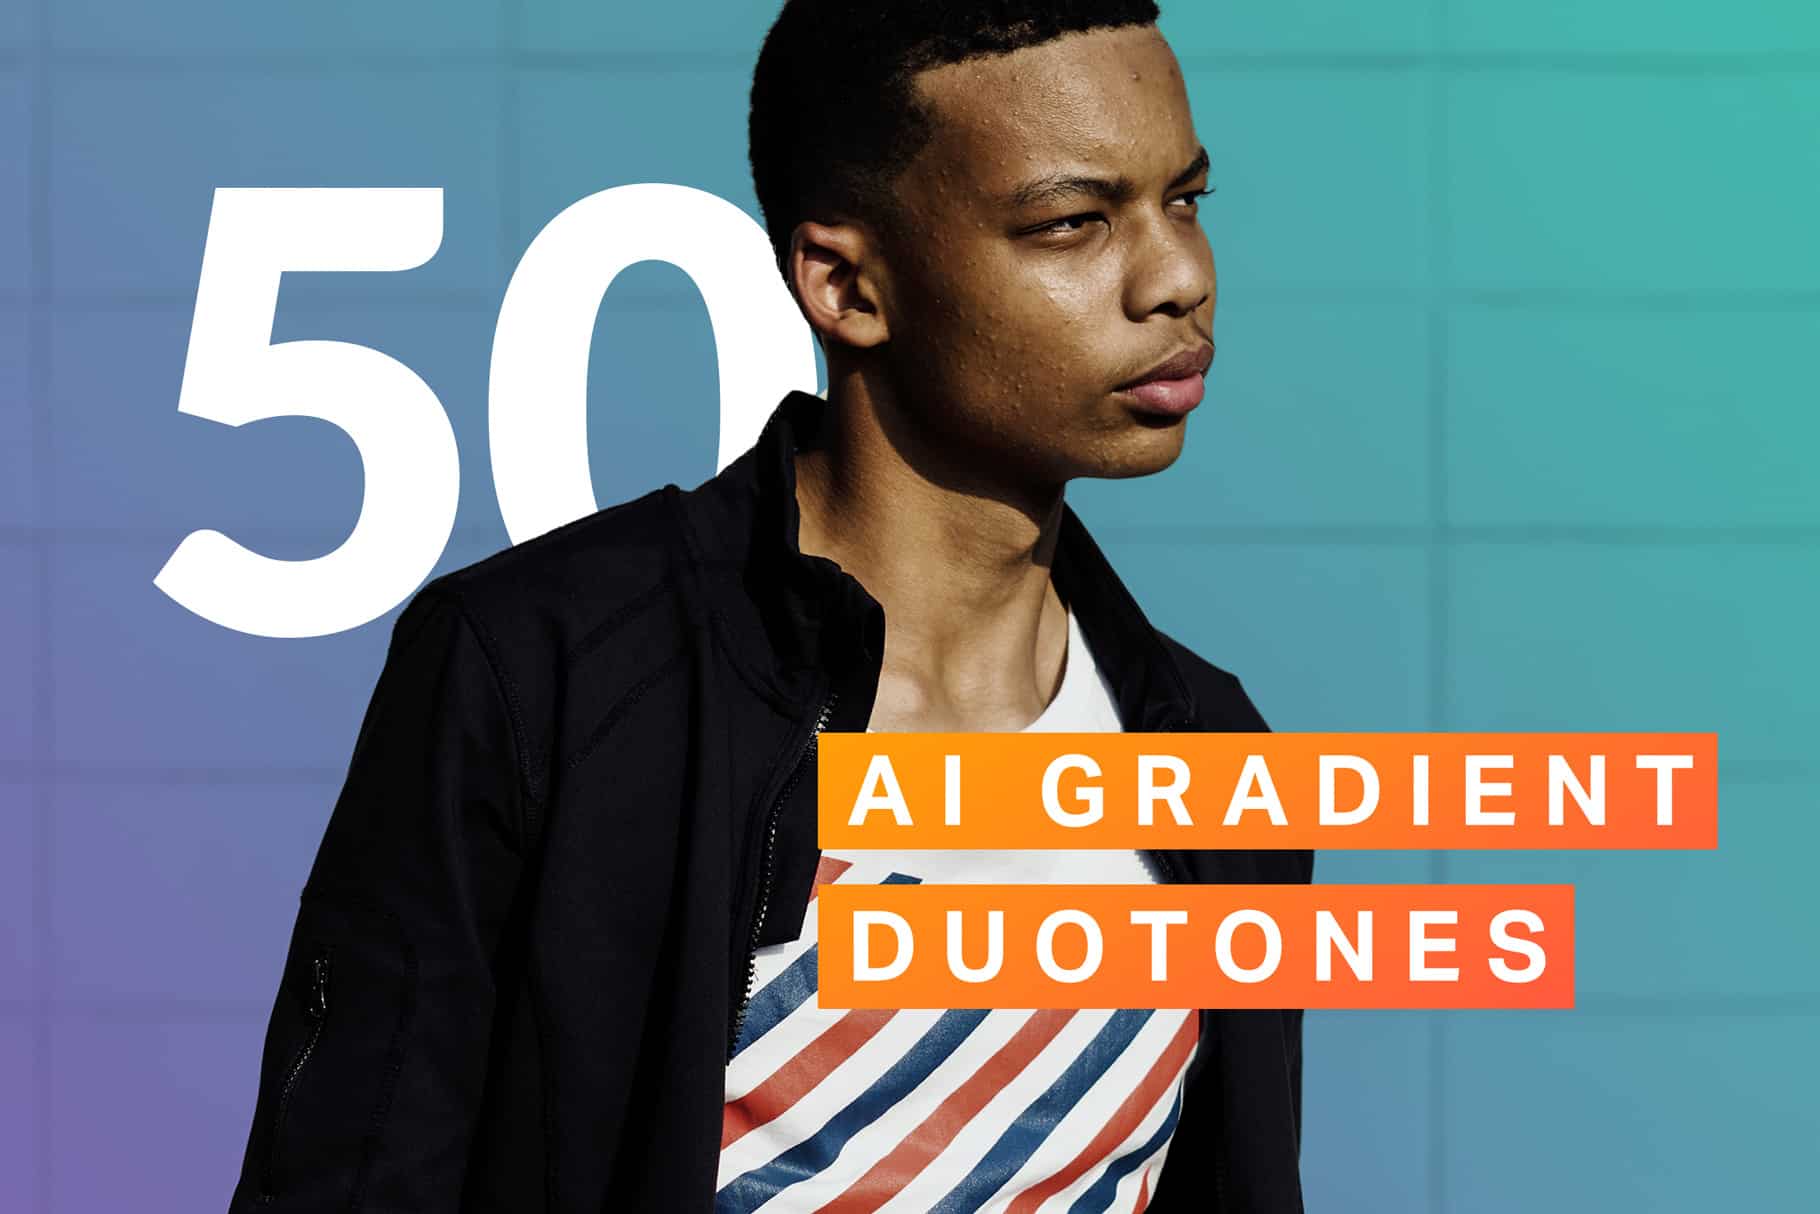 Our First AI-Powered Photoshop Actions – AI Gradient Duotones